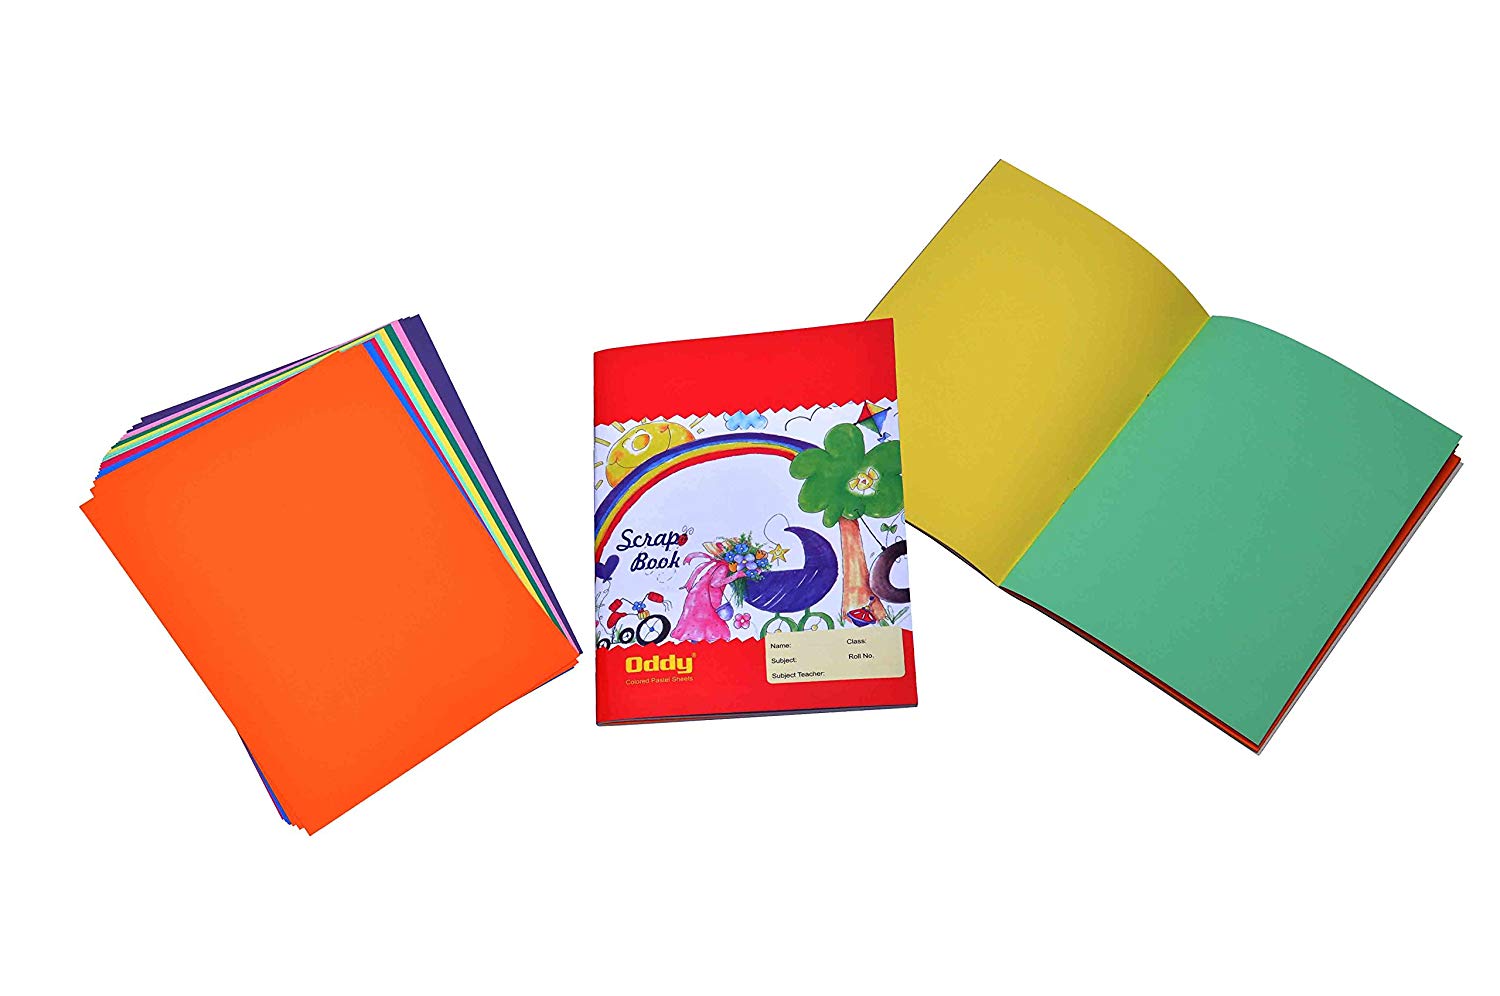 RDS Scrap Book With Colour Pastel Sheets, 32 Page In 8 Colours, A4 Size